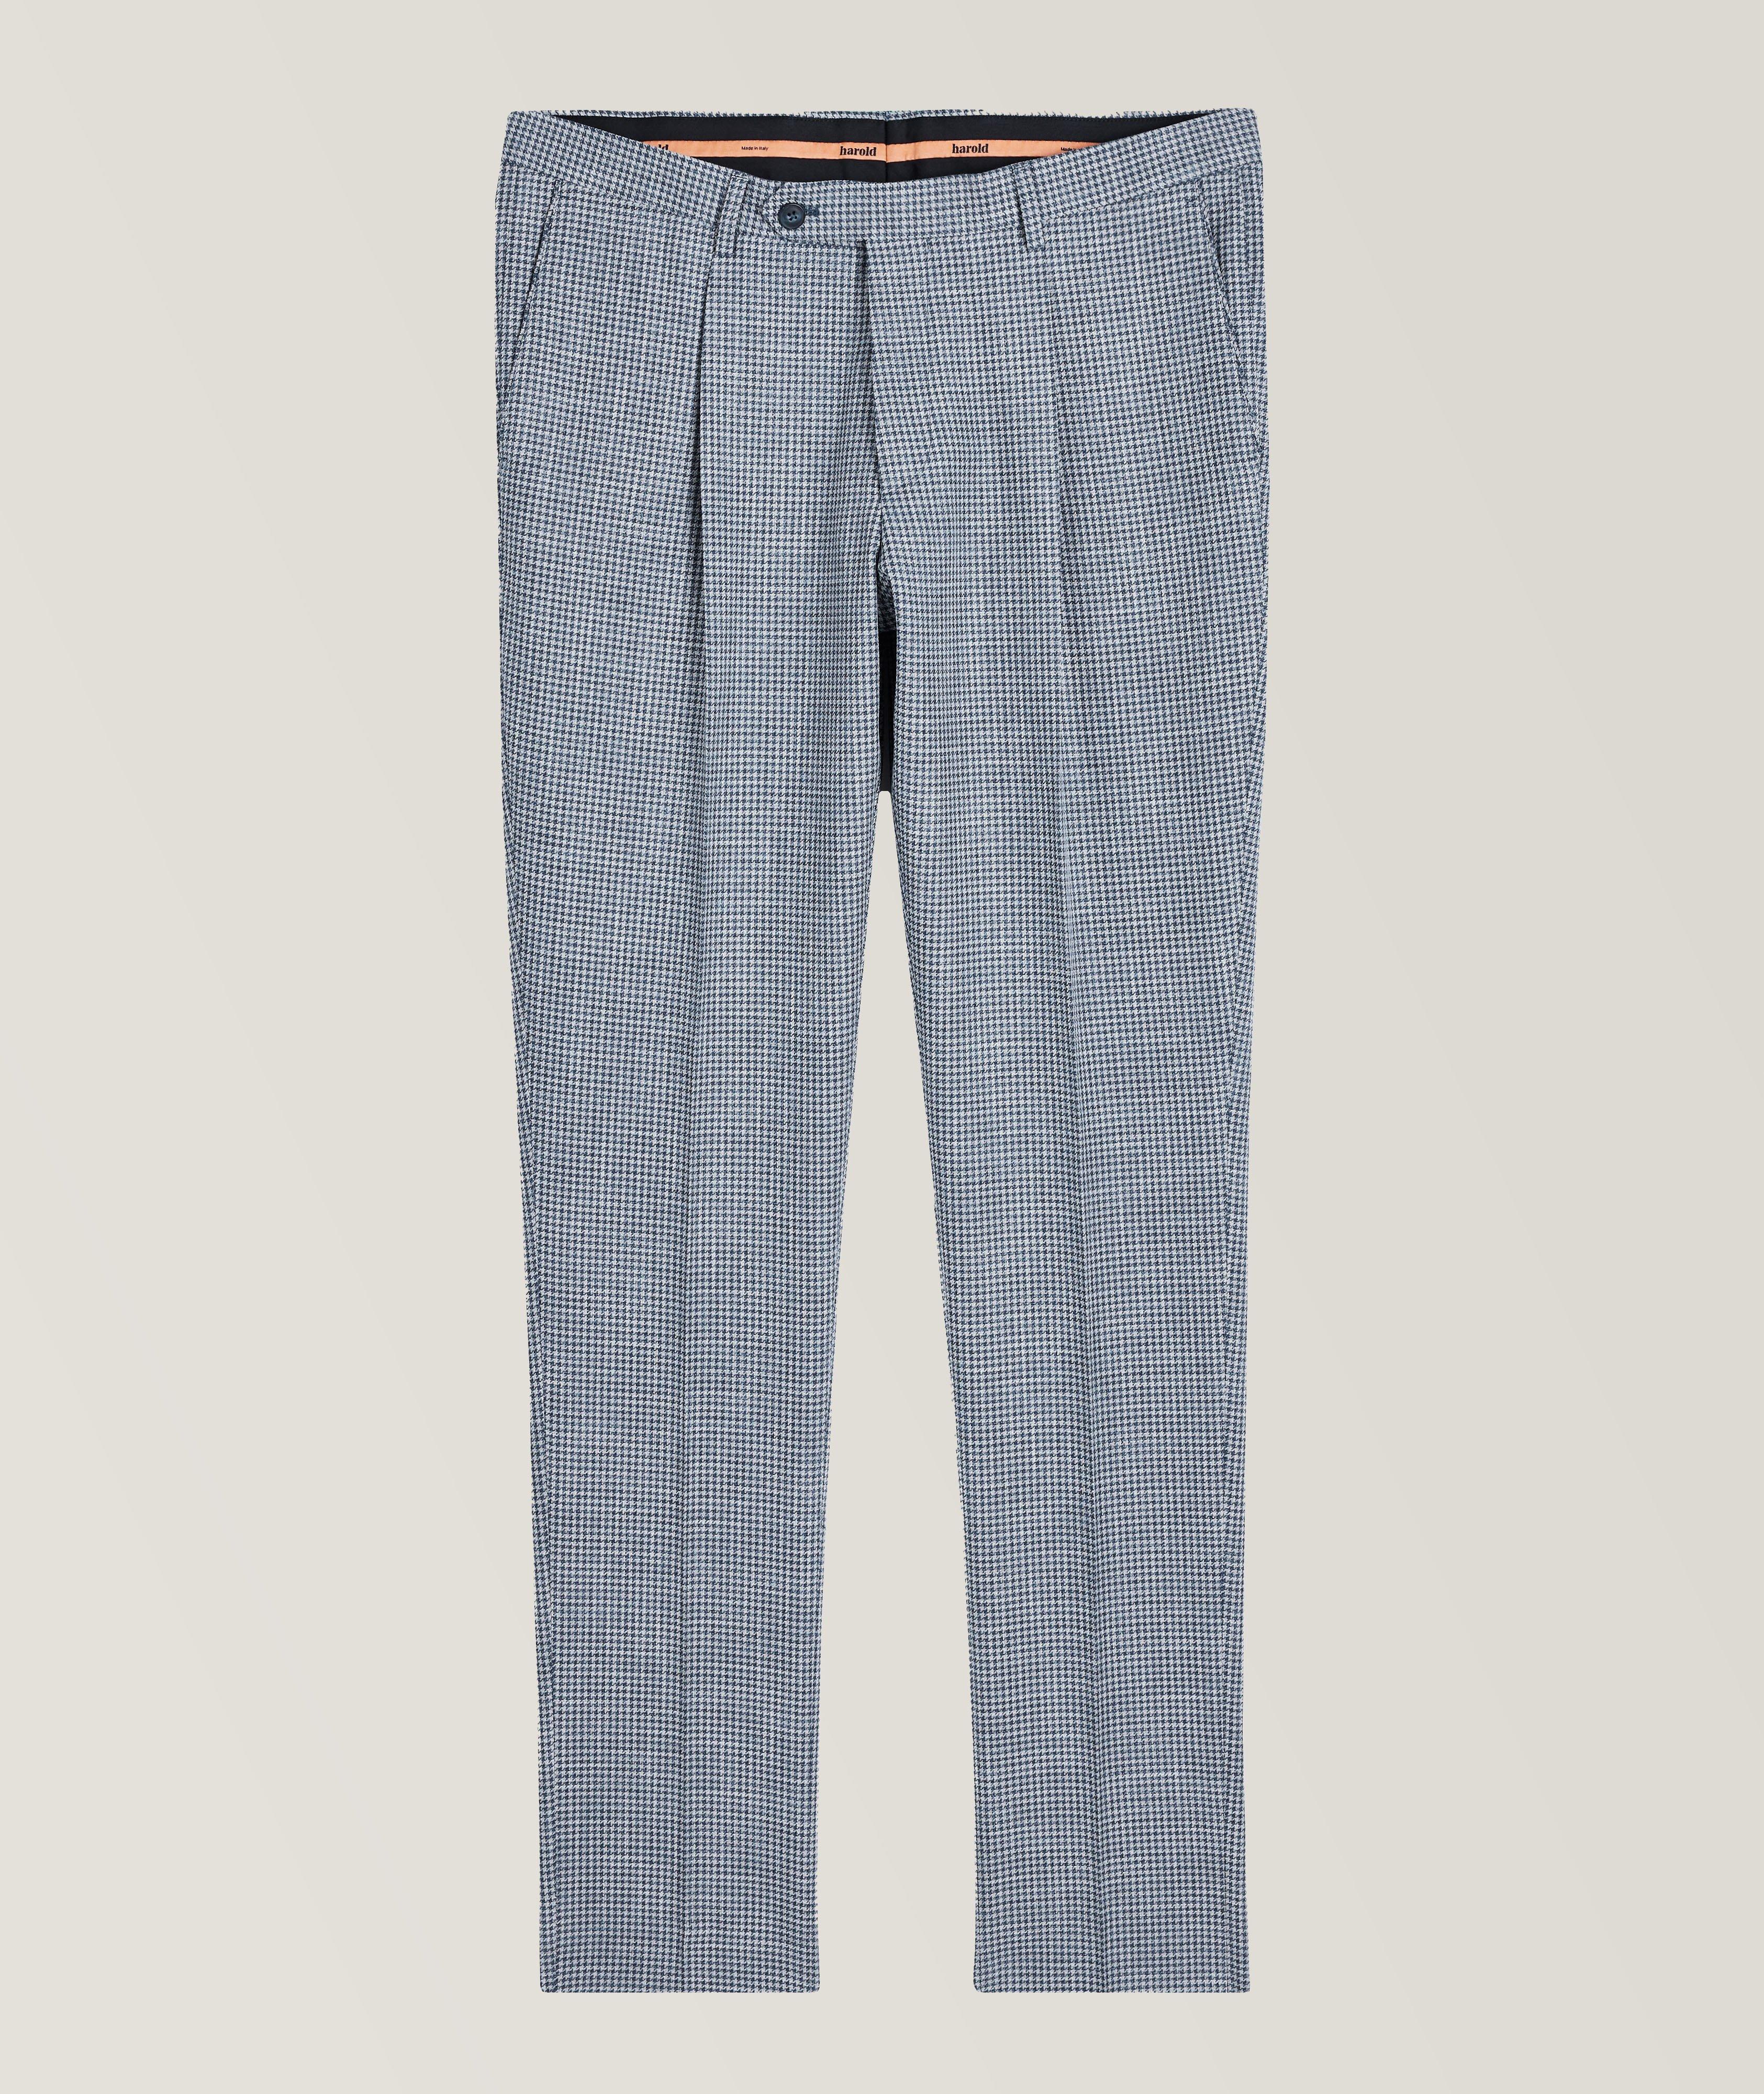 Microhoundstooth Cotton-Virgin Wool Pants  image 0